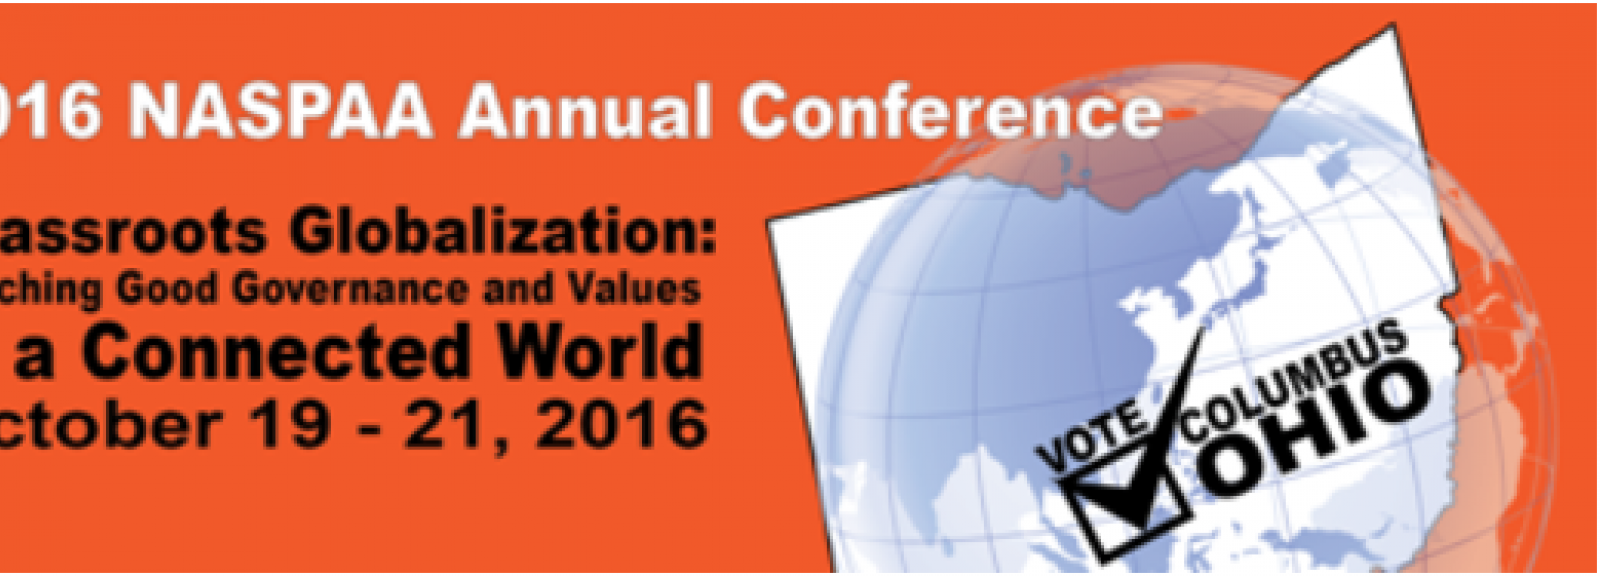 2016 Annual Conference